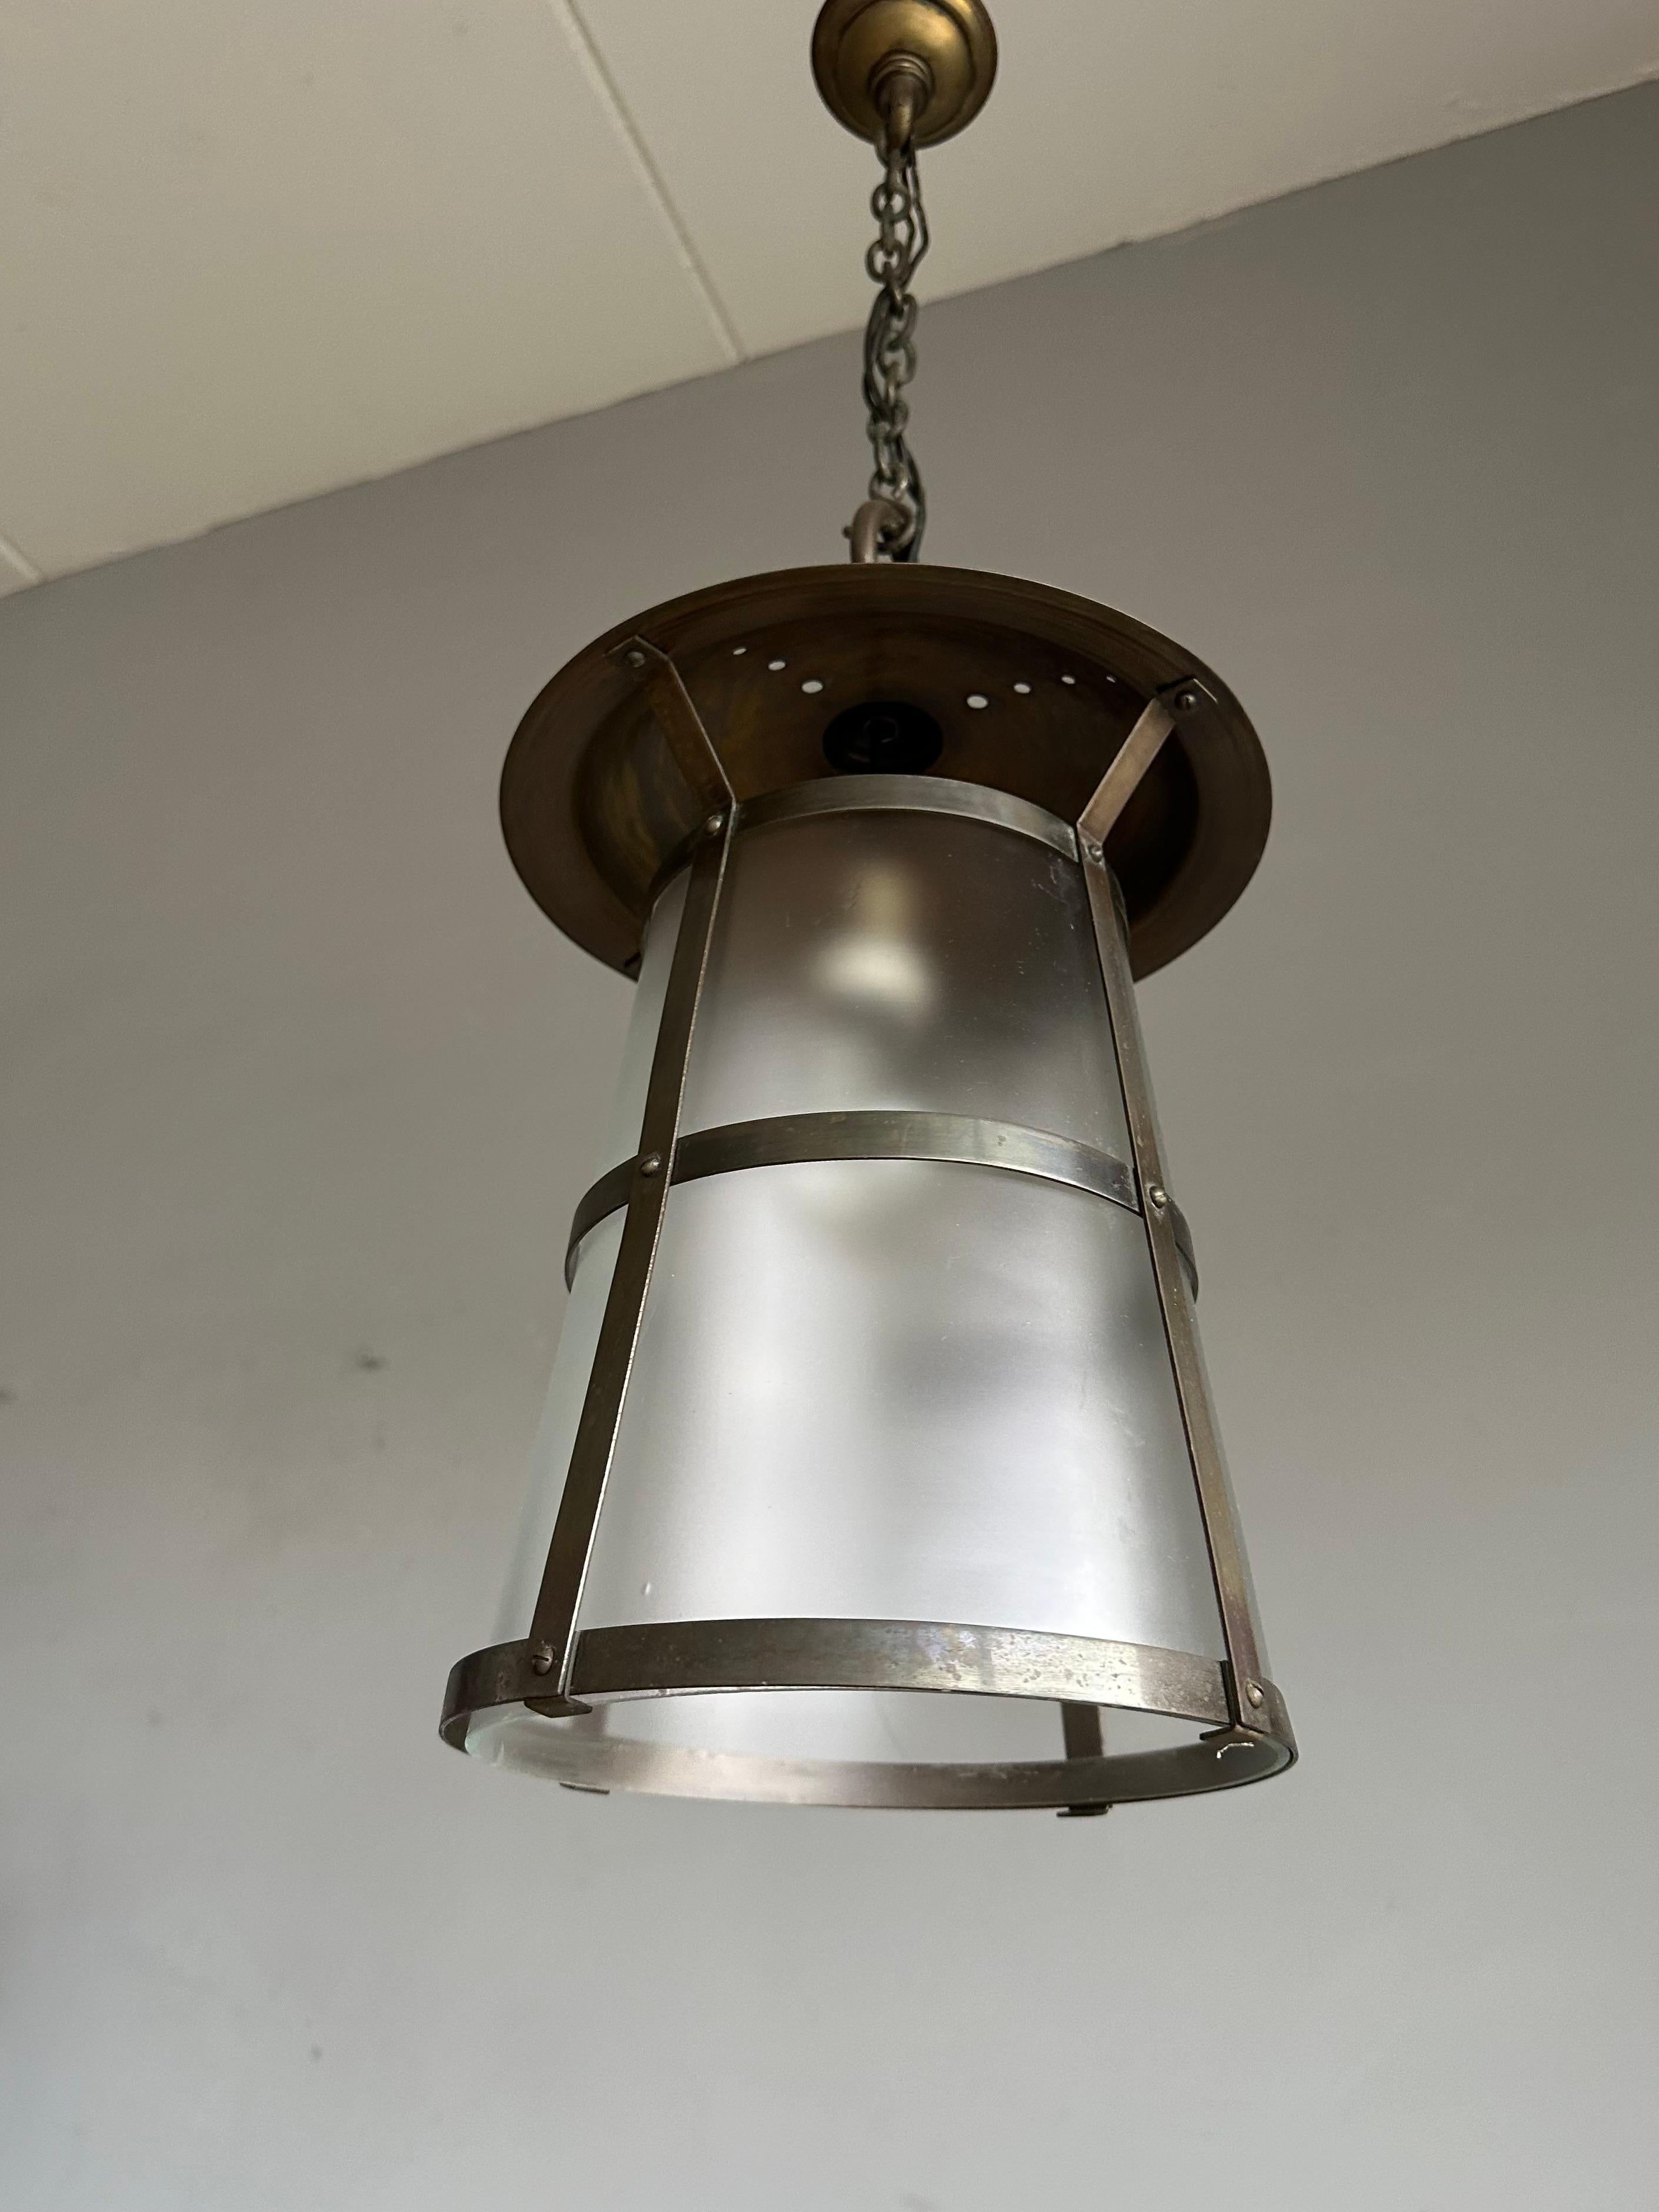 Highly Stylish Brass and Glass Arts & Crafts Pendant Light, 1910 Berlage Style For Sale 11